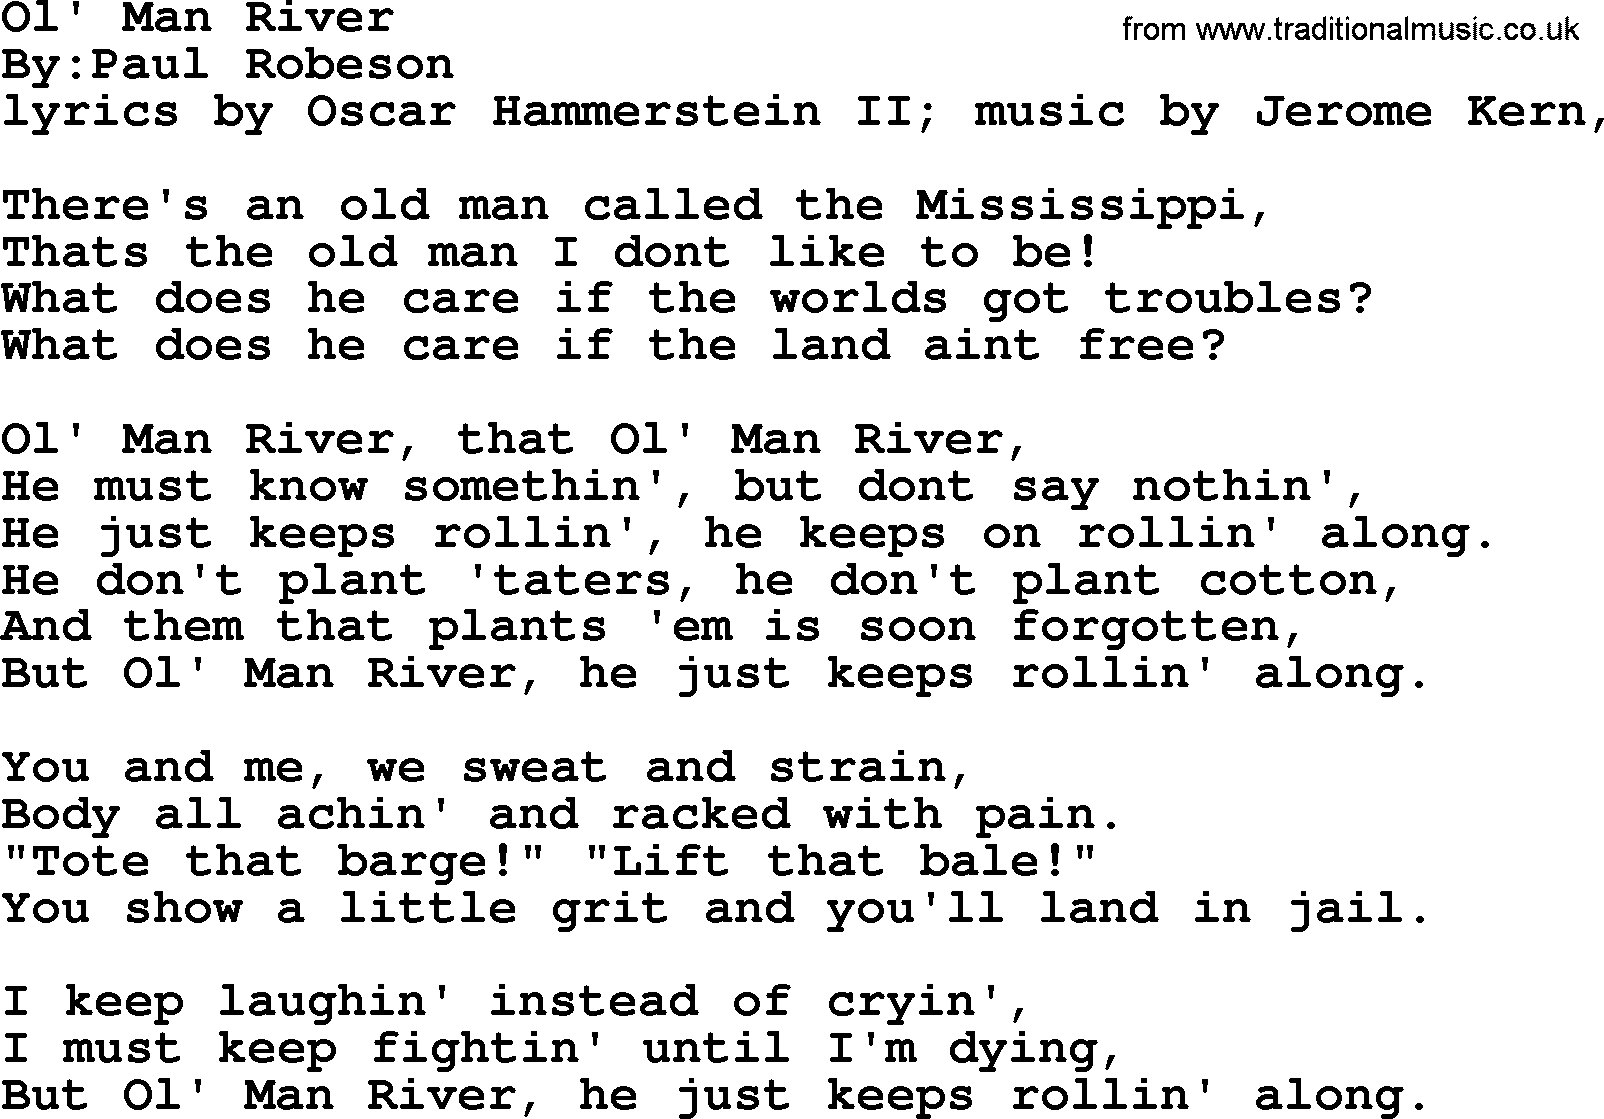 Political, Solidarity, Workers or Union song: Ol Man River, lyrics